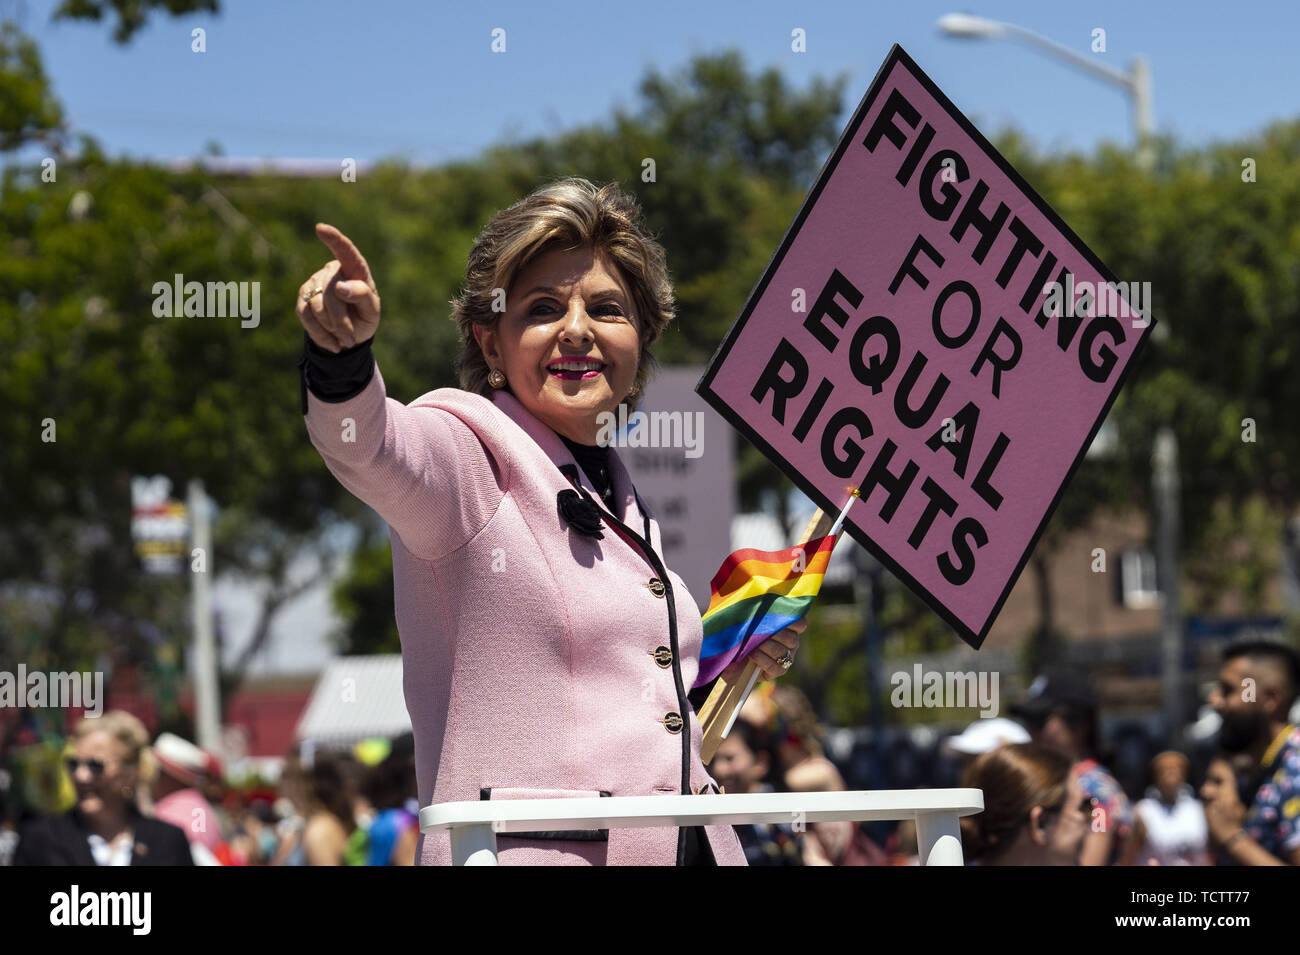 Los Angeles, California, USA. 15th Mar, 2019. Gloria Allred participates in the LA Pride Parade in West Hollywood, California.The 49th annual gay pride parade includes a music festival and a parade that draws large crowds. Credit: Ronen Tivony/SOPA Images/ZUMA Wire/Alamy Live News Stock Photo